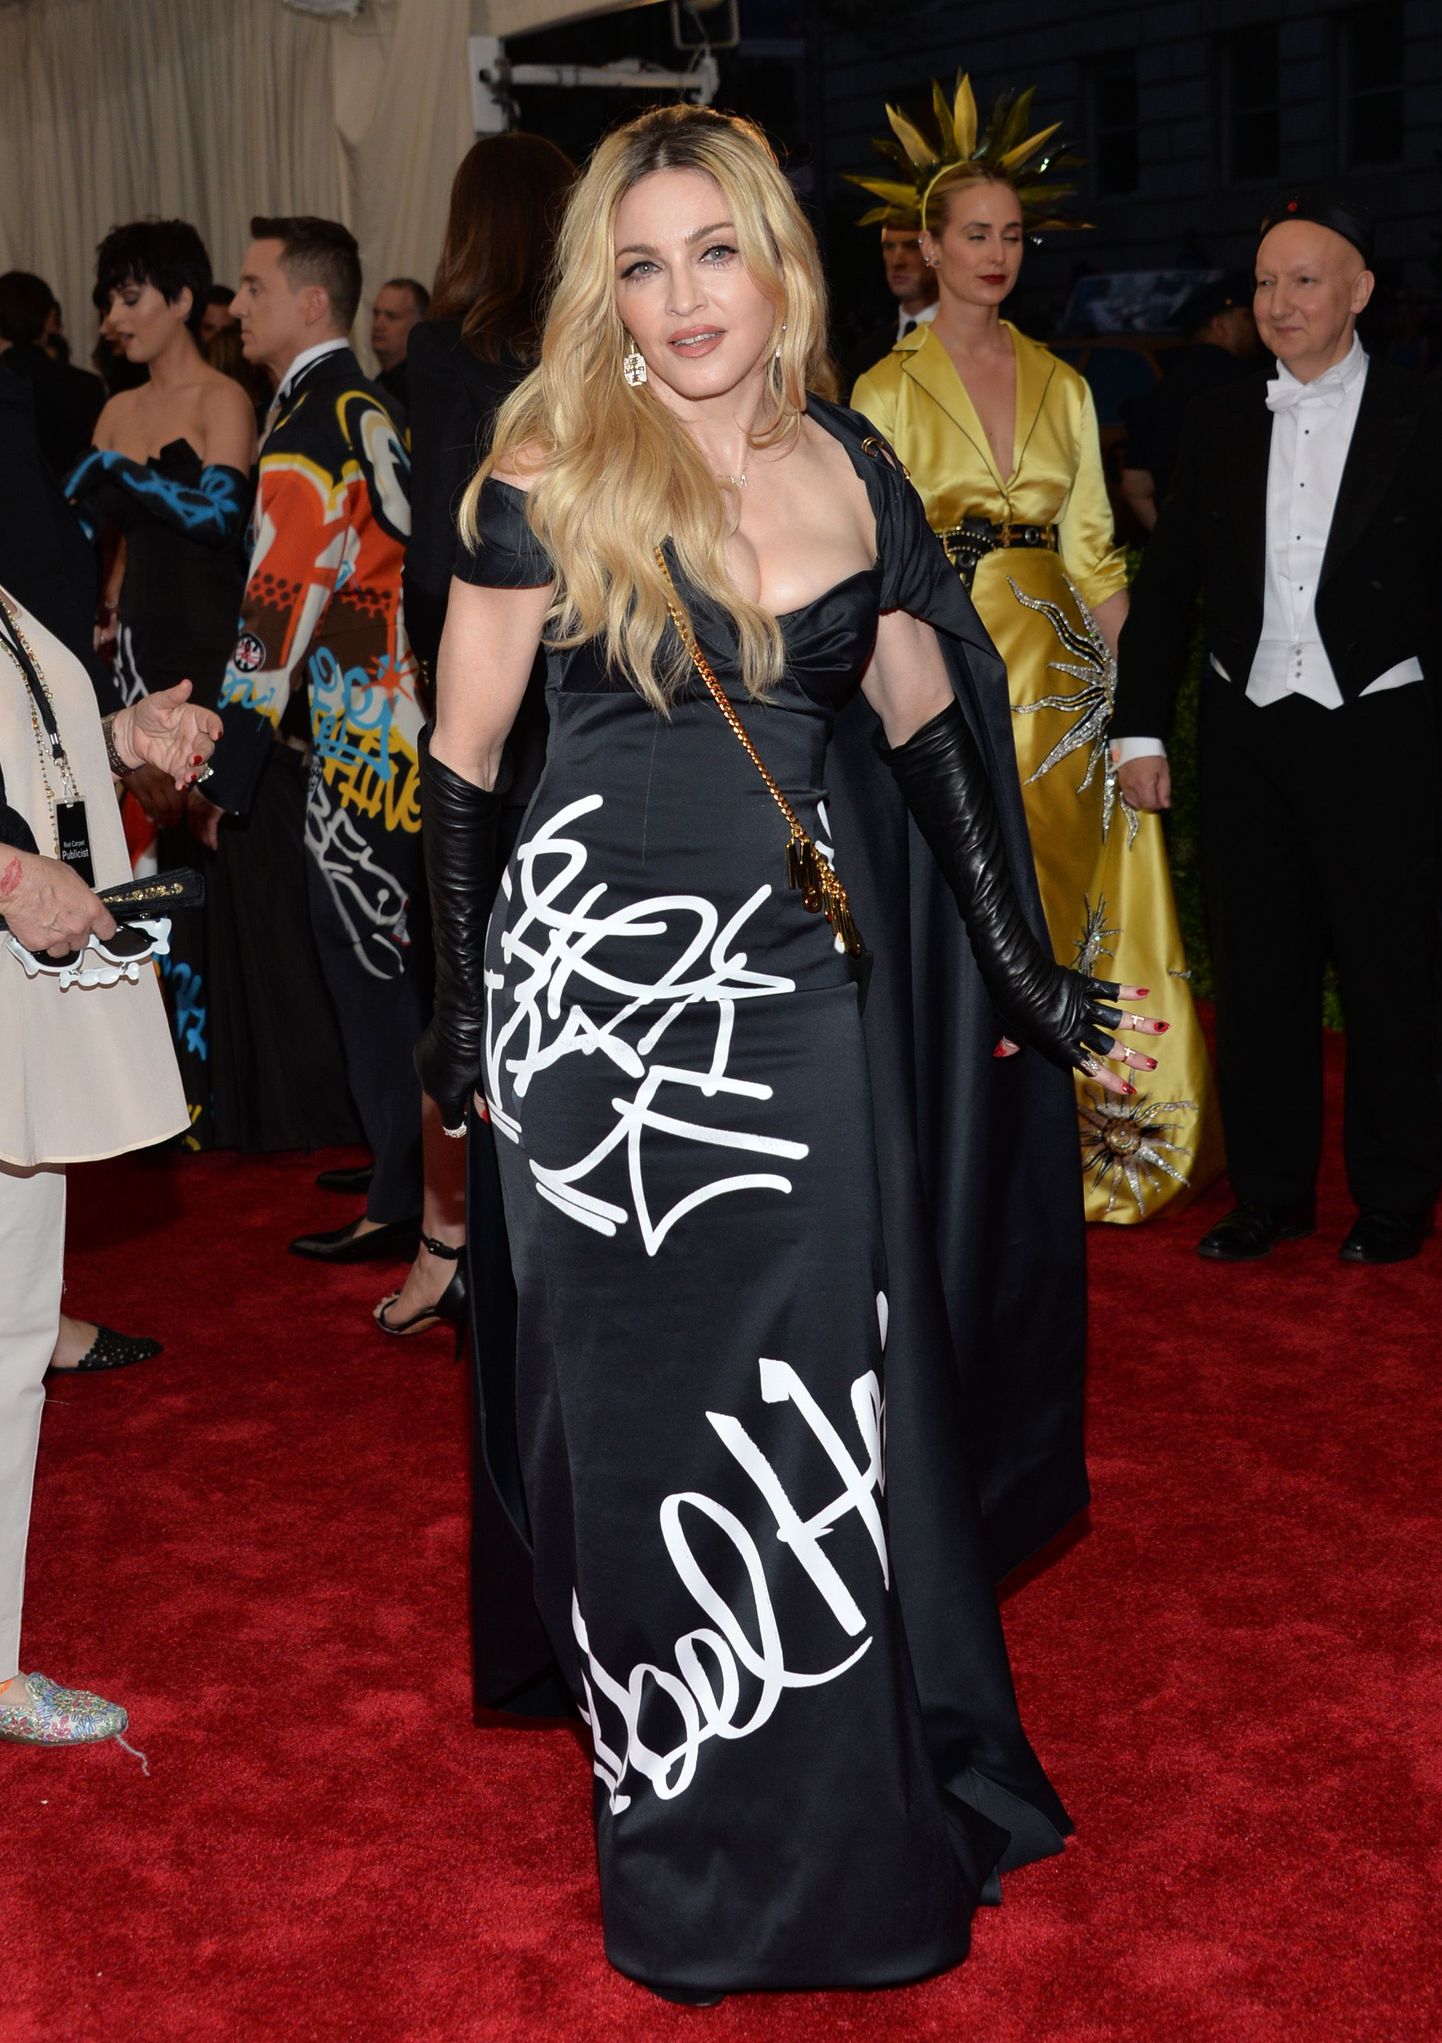 Madonna arrives at The Metropolitan Museum of Art's Costume Institute benefit gala celebrating "China: Through the Looking Glass" on Monday, May 4, 2015, in New York. (Photo by Evan Agostini/Invision/AP)